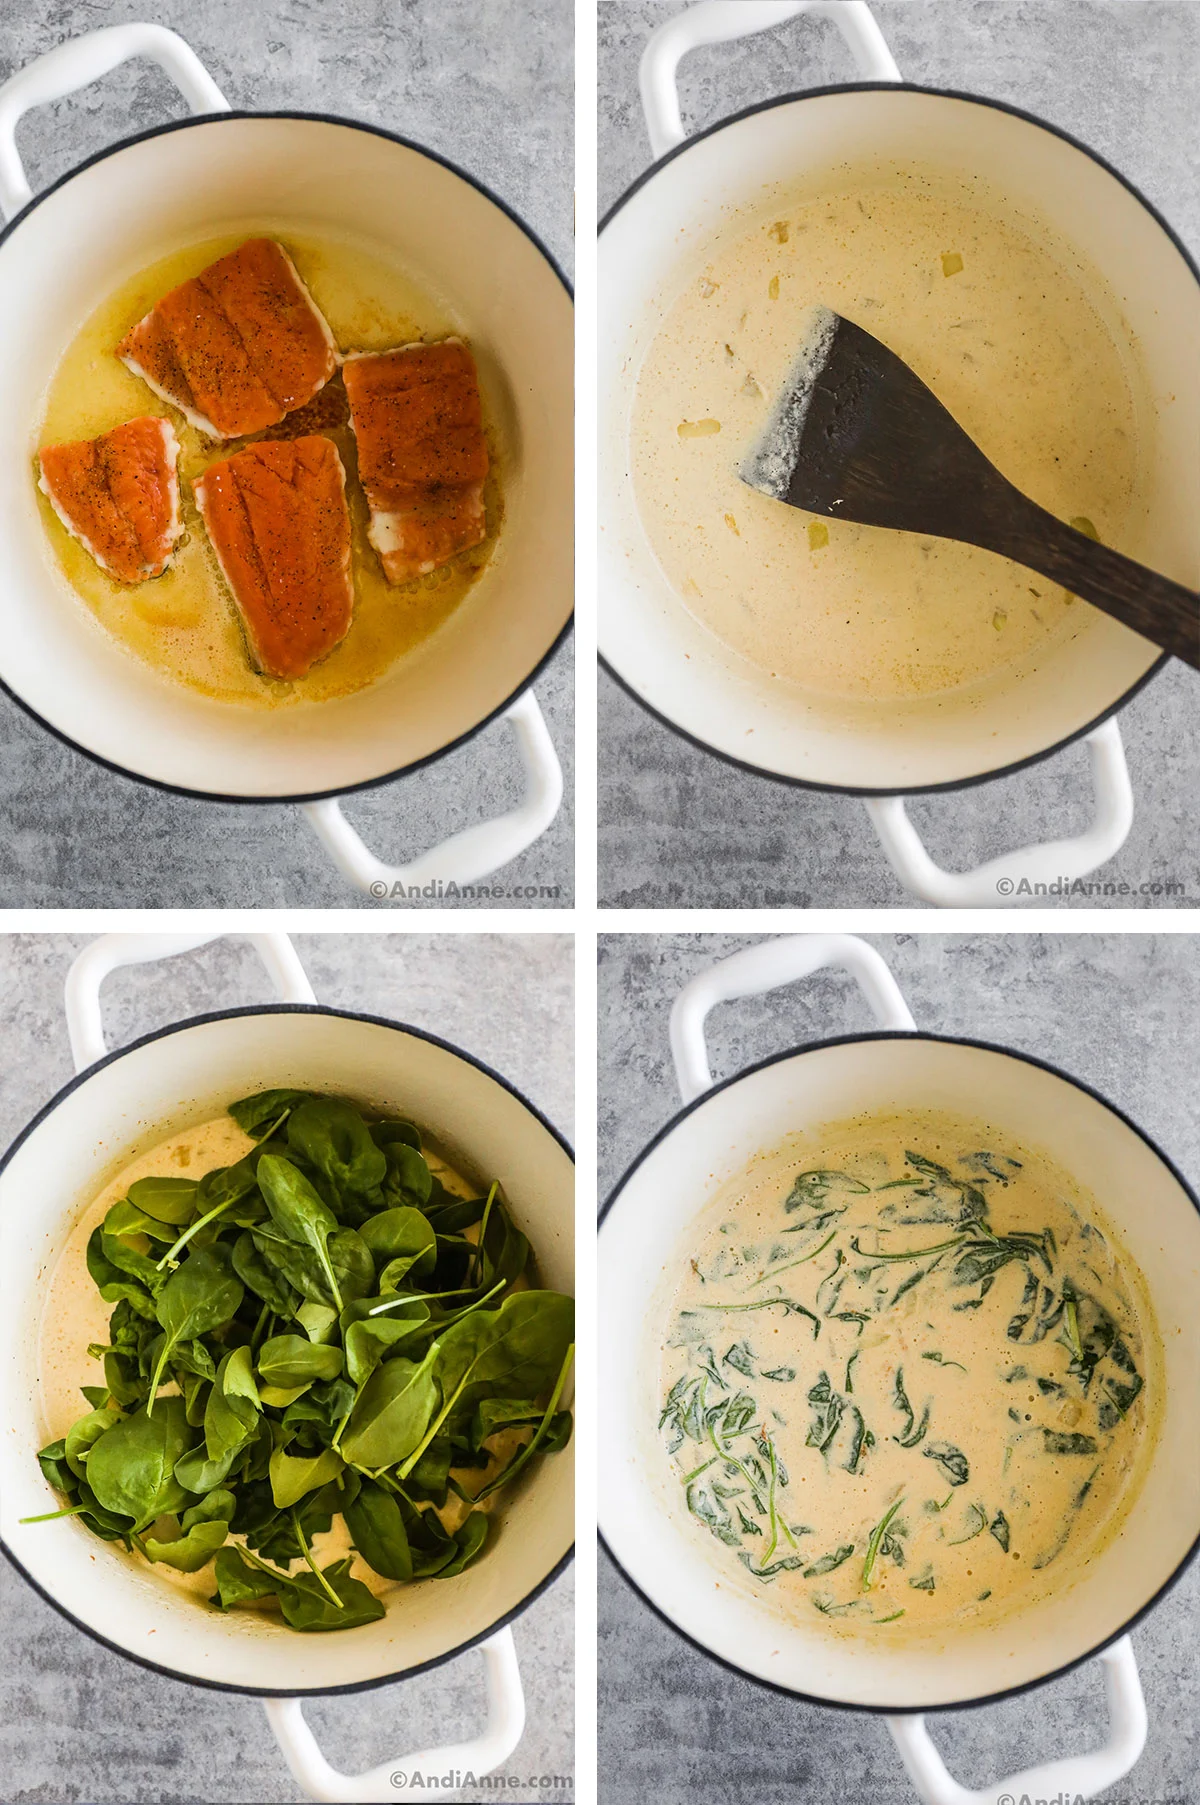 Four images showing steps to make recipe. First is a white pot with a cut up salmon fillet in melted butter, second is creamy sauce with a spatula, third is fresh spinach dumped over the creamy sauce, fourth is wilted spinach in the creamy sauce.